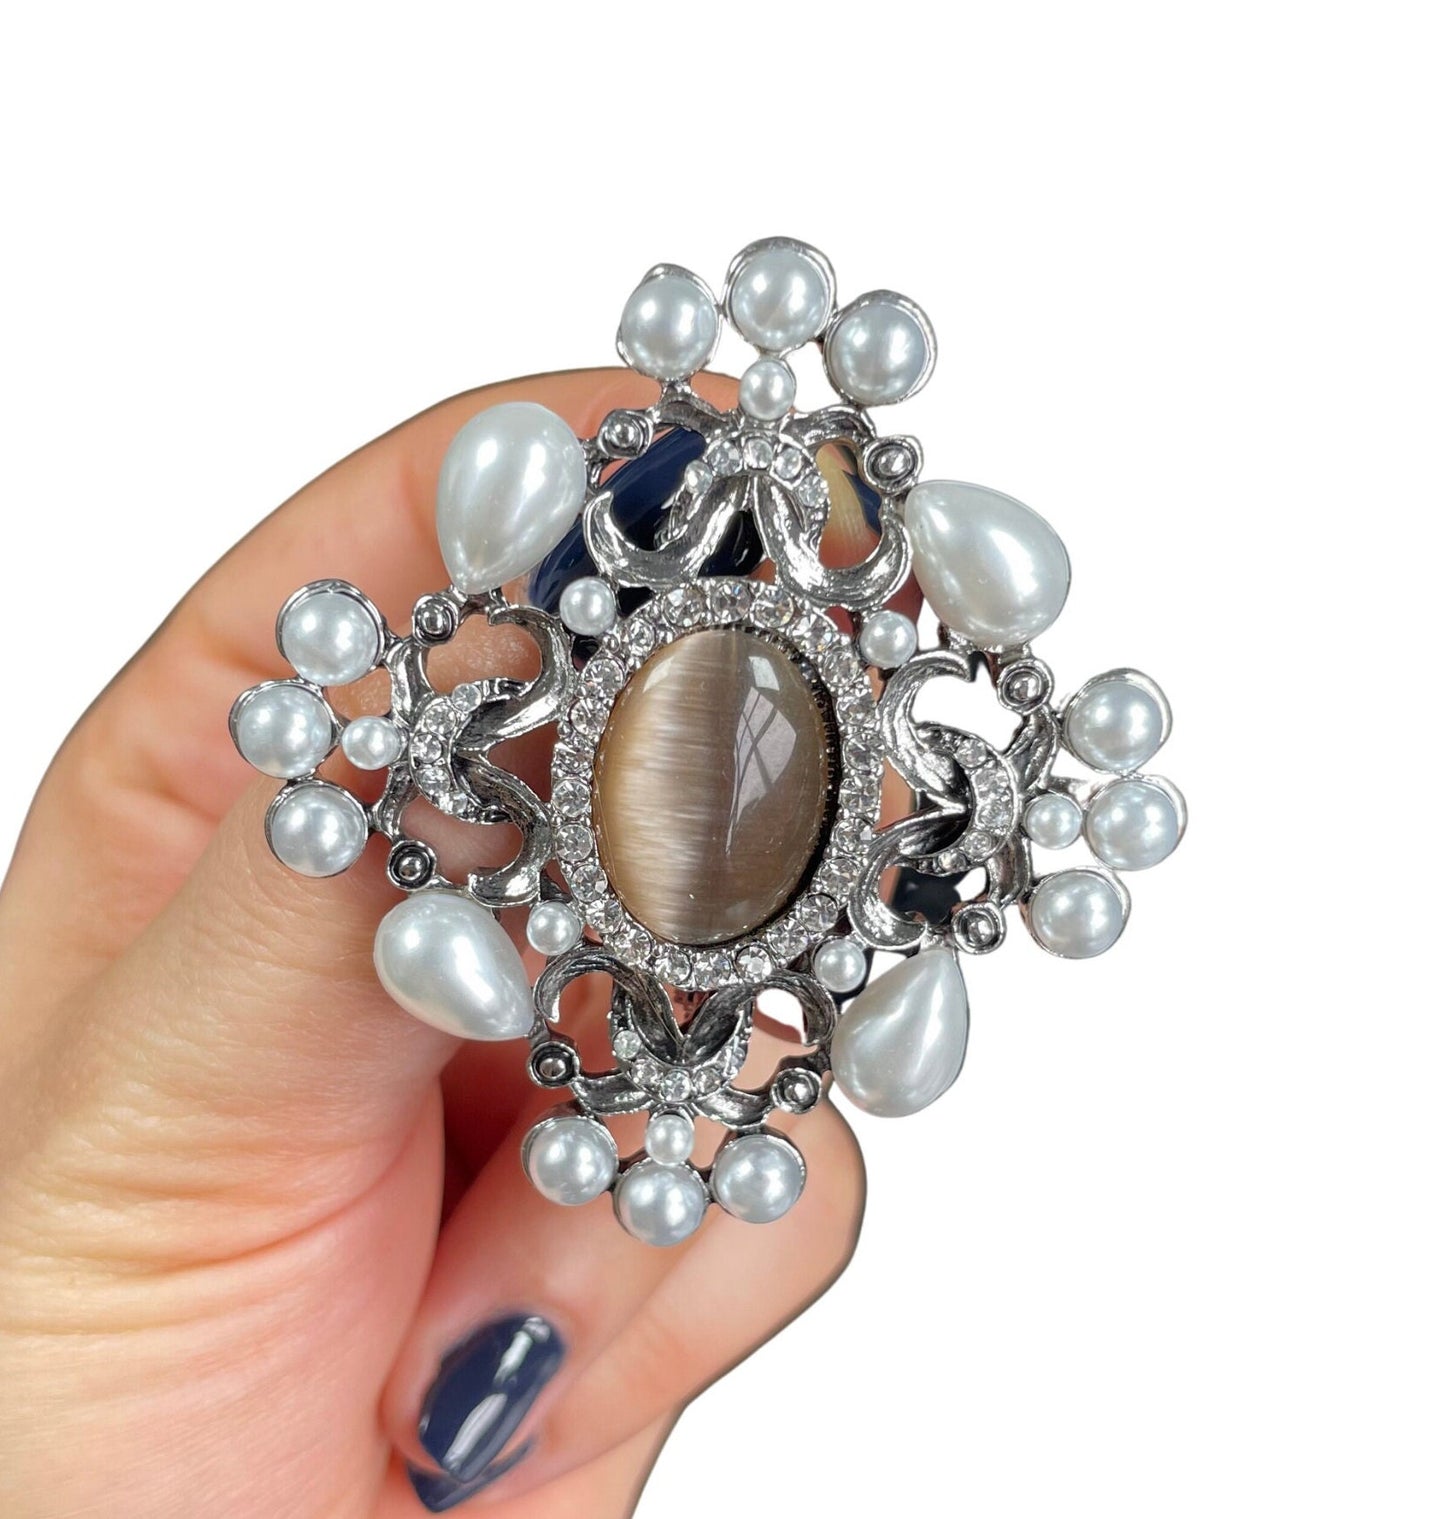 Stunning Pearl And Rhinestone Brooch / Elegant Pearl Silver Costume Brooch / Vintage Look Pearl Coat Pin / Silver Tone Brooch / Gift For Her